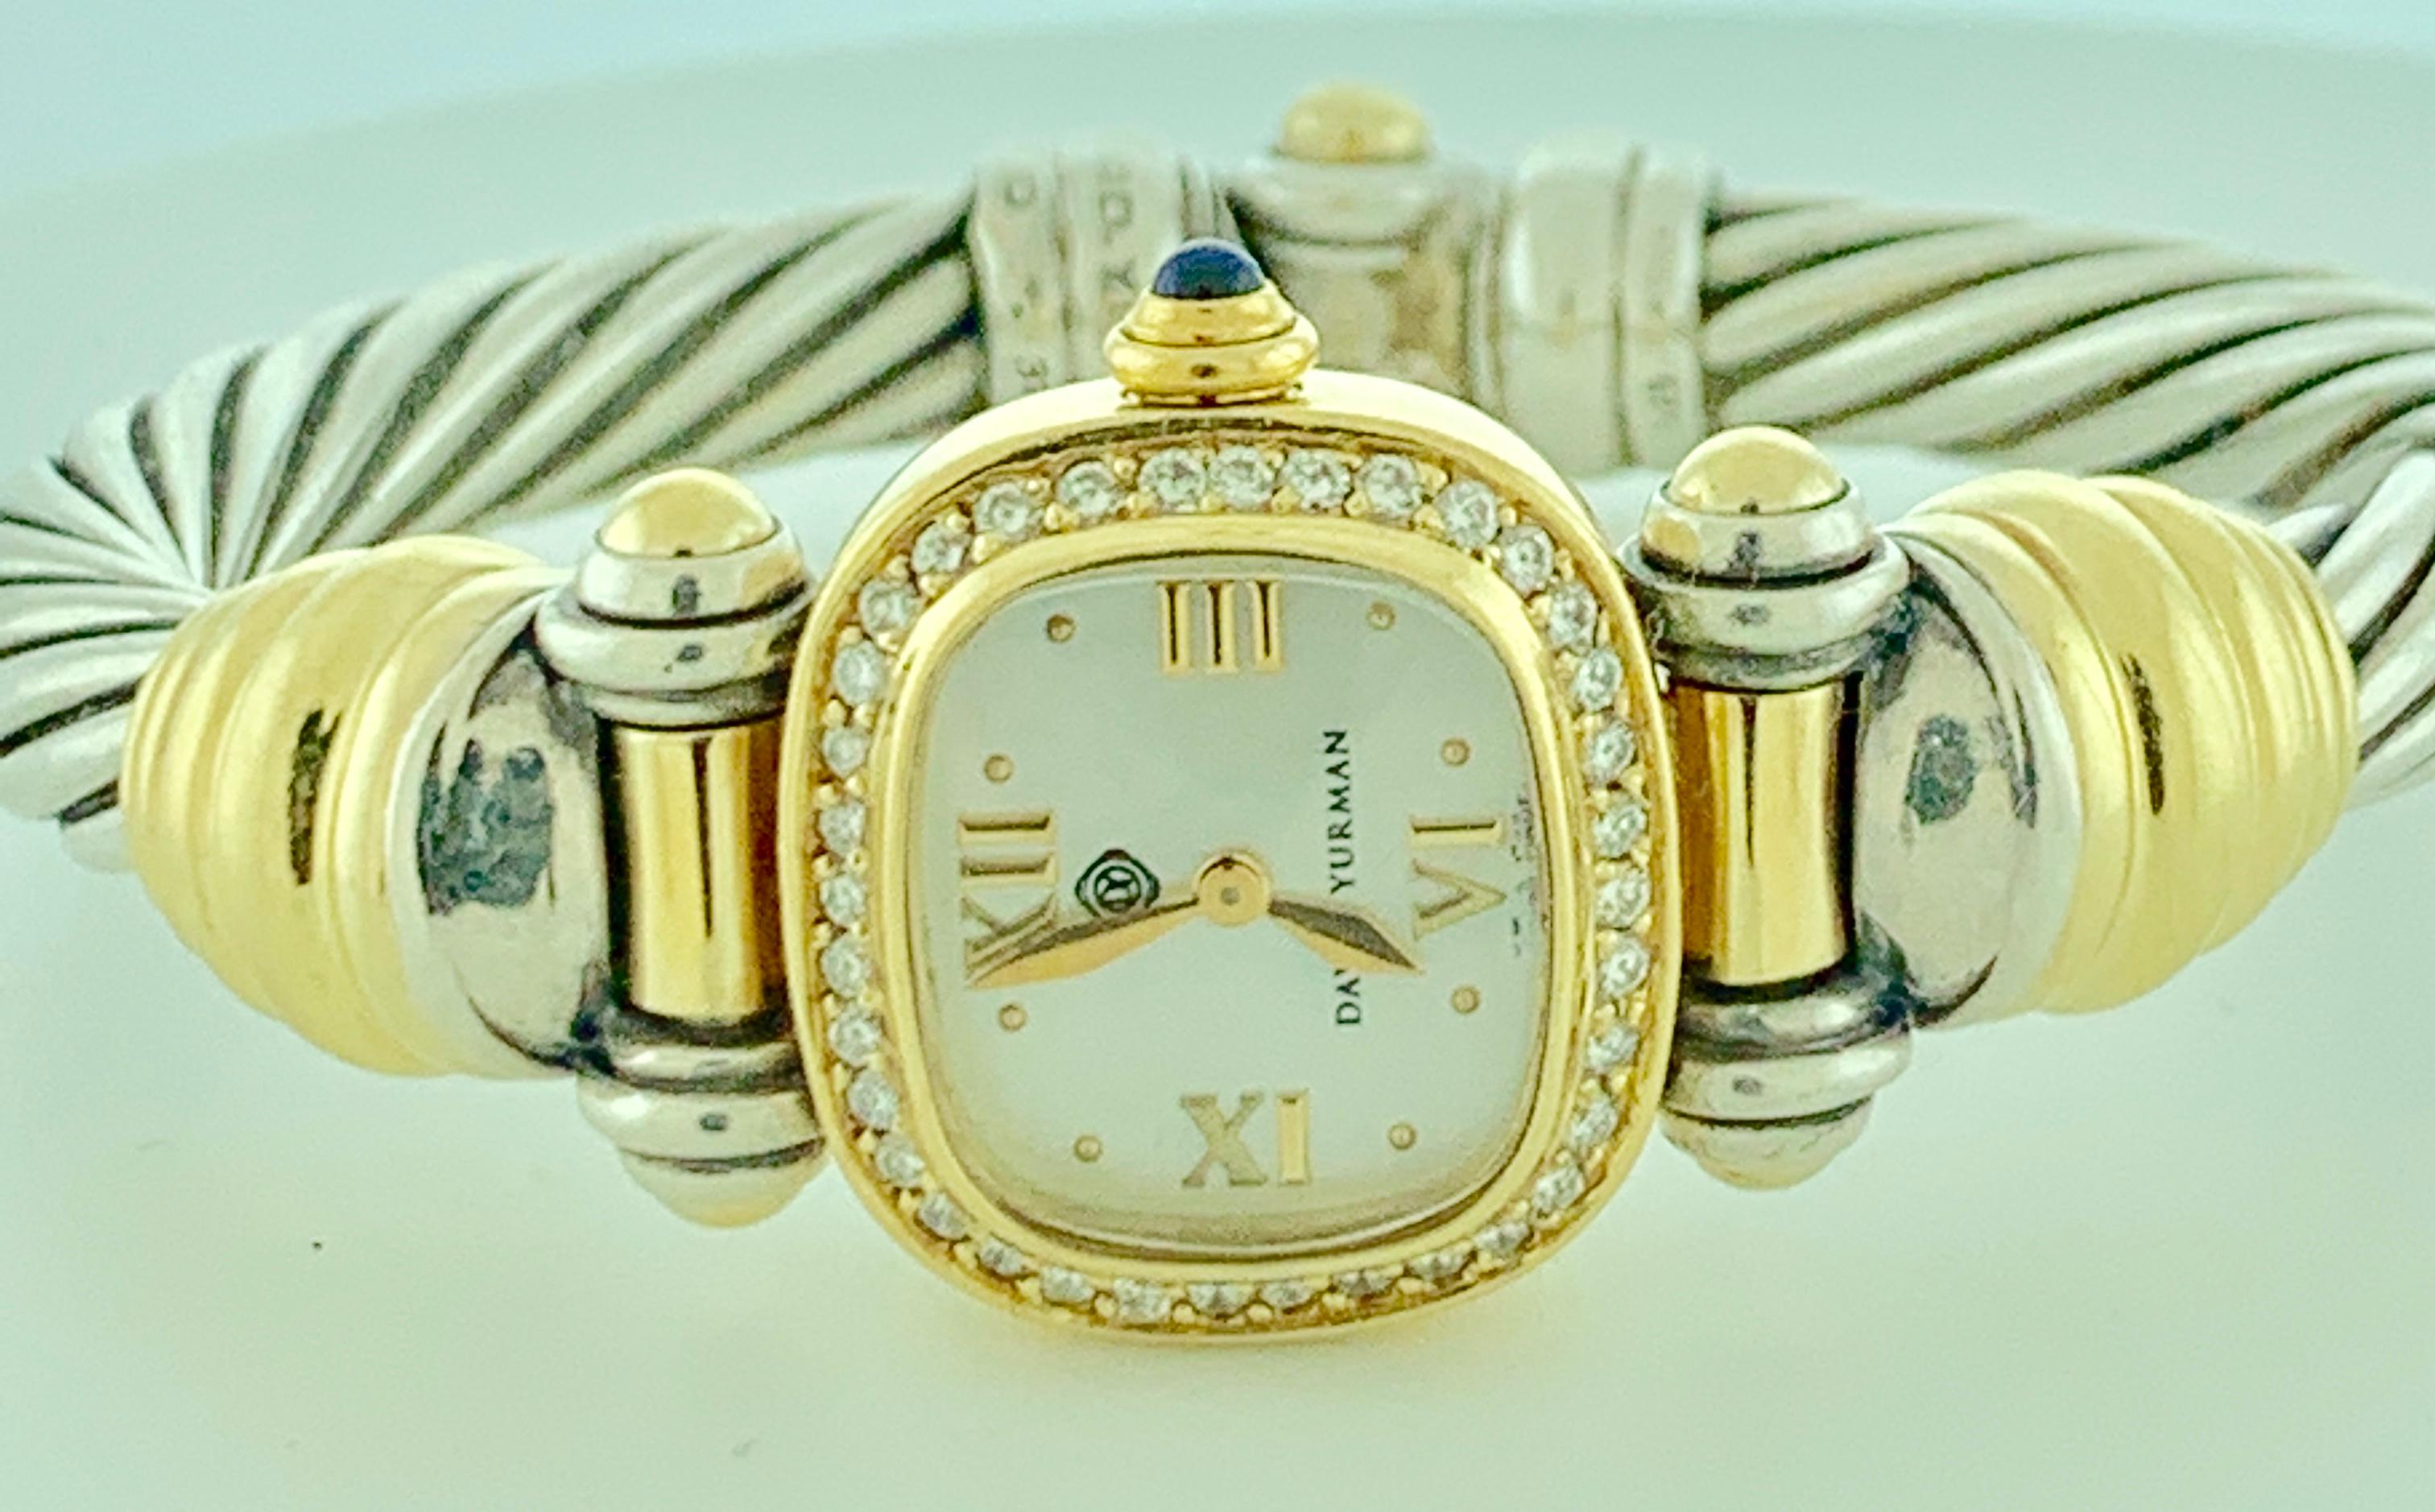 David Yurman Sterling silver and 18 karat 750 yellow gold braided sterling cable bangle watch with diamond bezel, and cabochon cut sapphire crown. 50 grams. Stamped on the back 